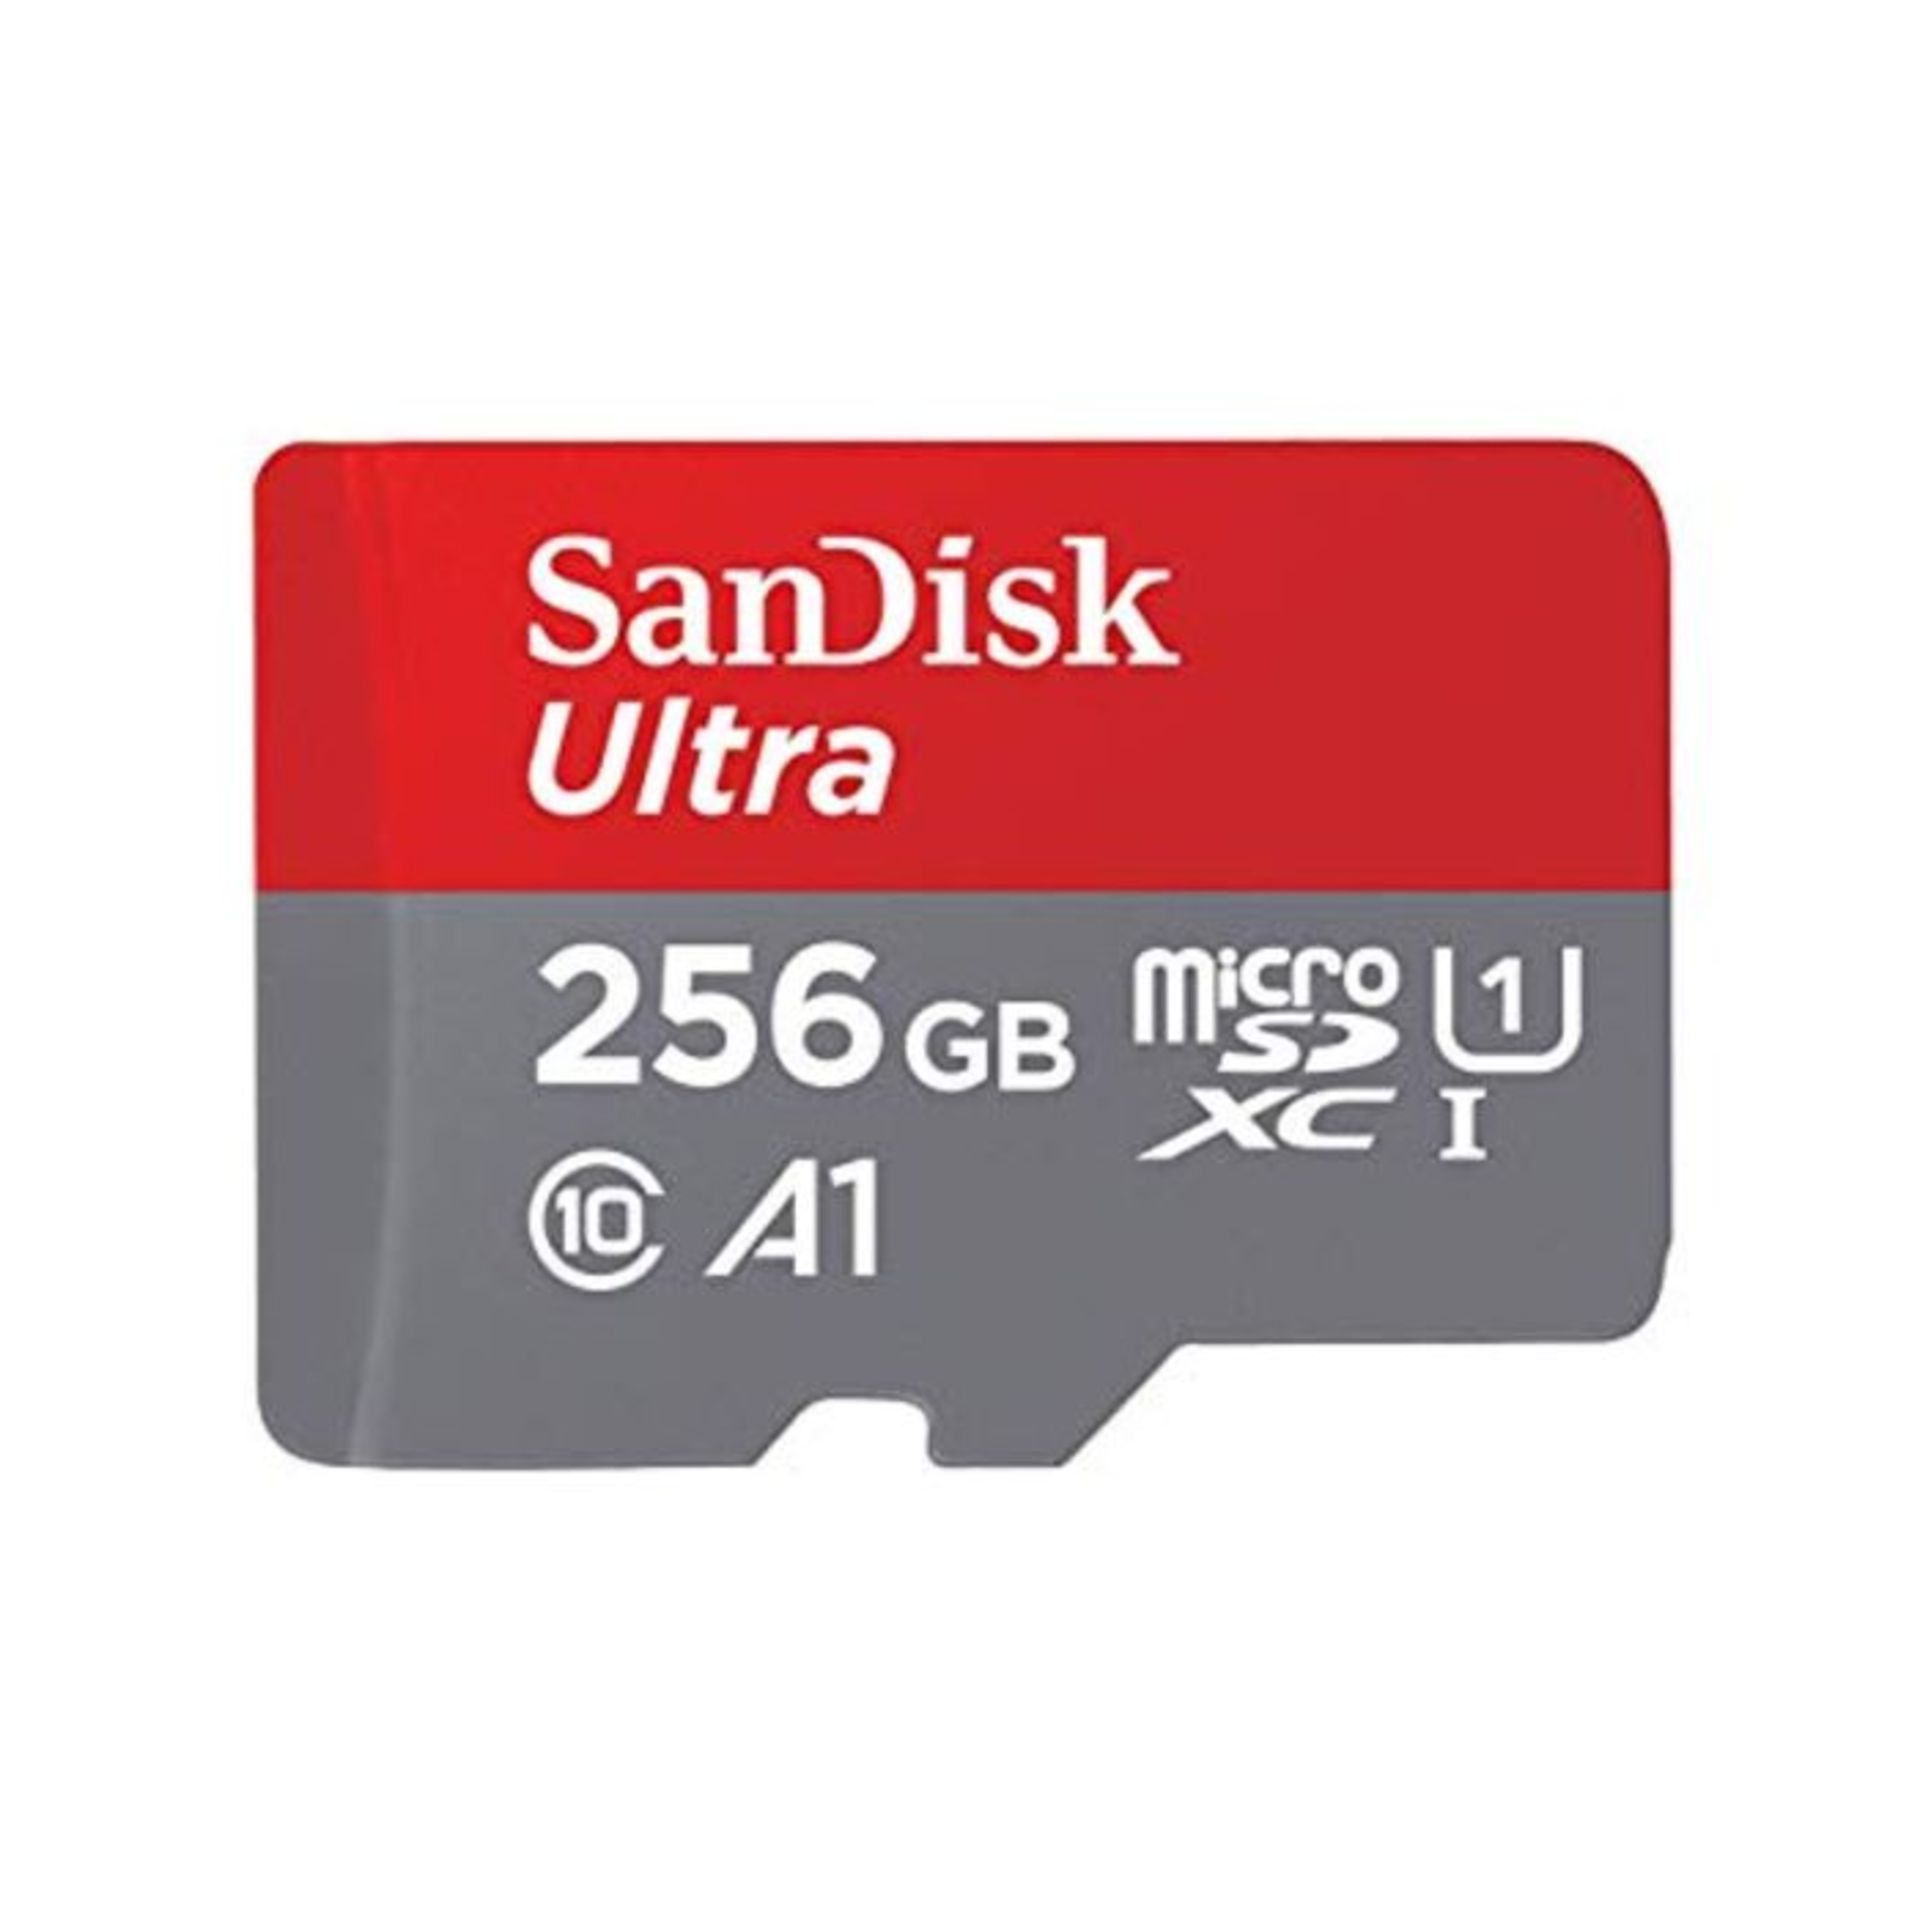 SanDisk Ultra 256 GB microSDXC Memory Card SD Adapter with A1 App Performance Up to